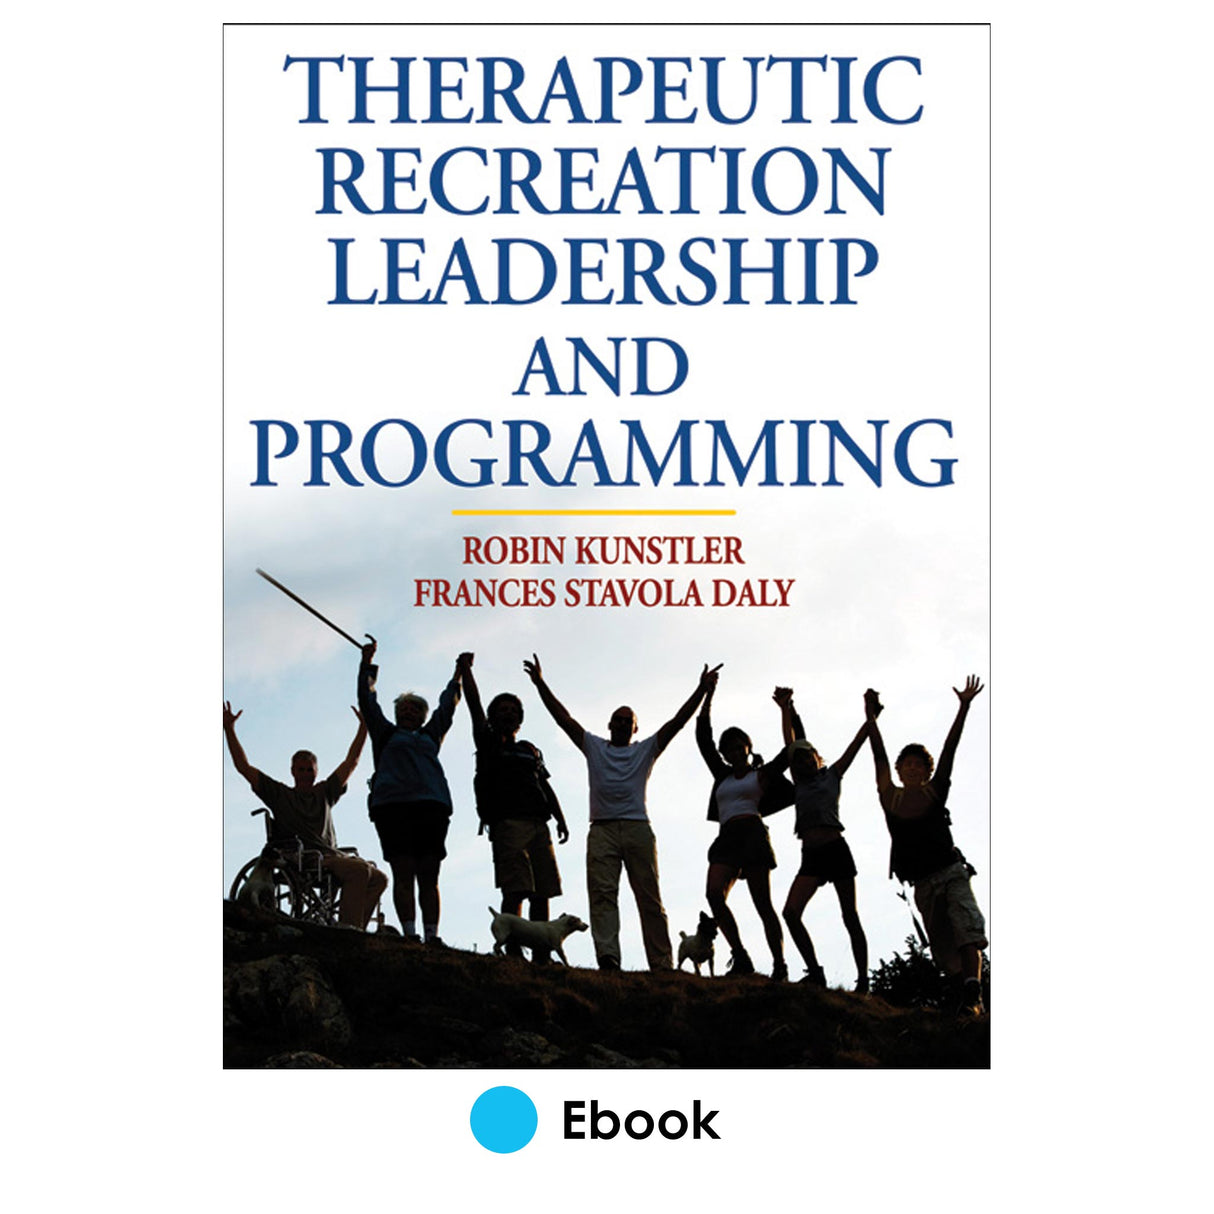 Therapeutic Recreation Leadership and Programming PDF